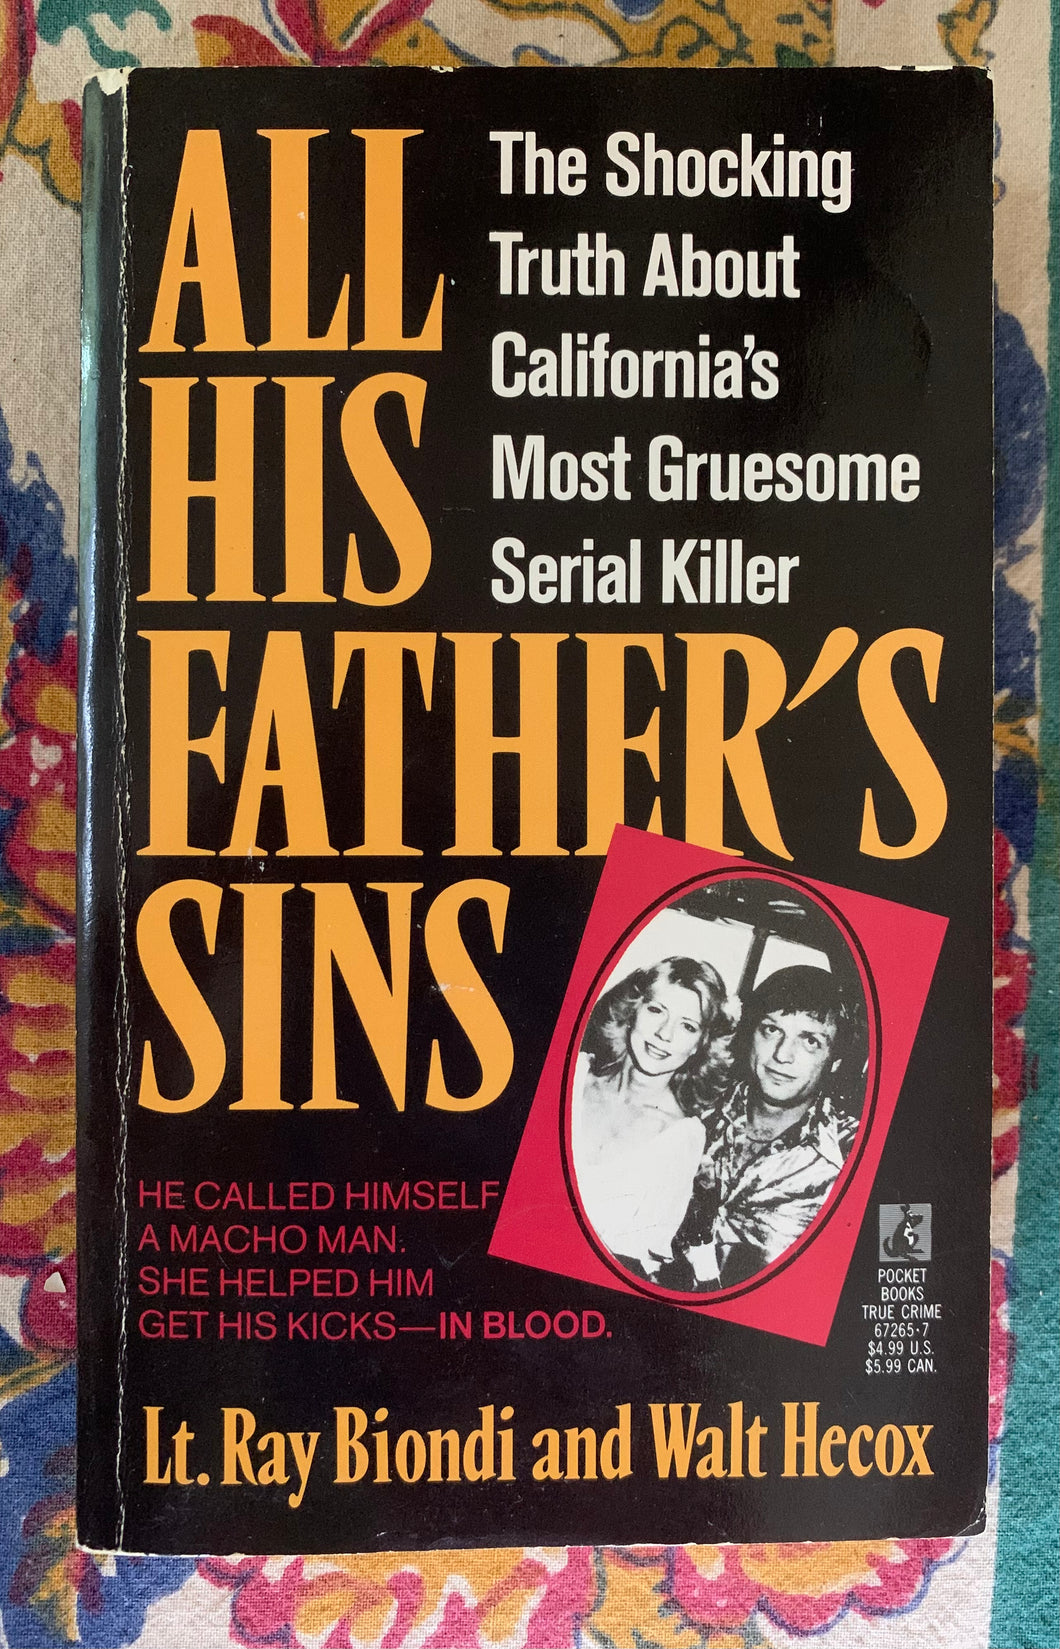 All His Father's Sins: The Shocking Truth About California's Most Gruesome Serial Killer